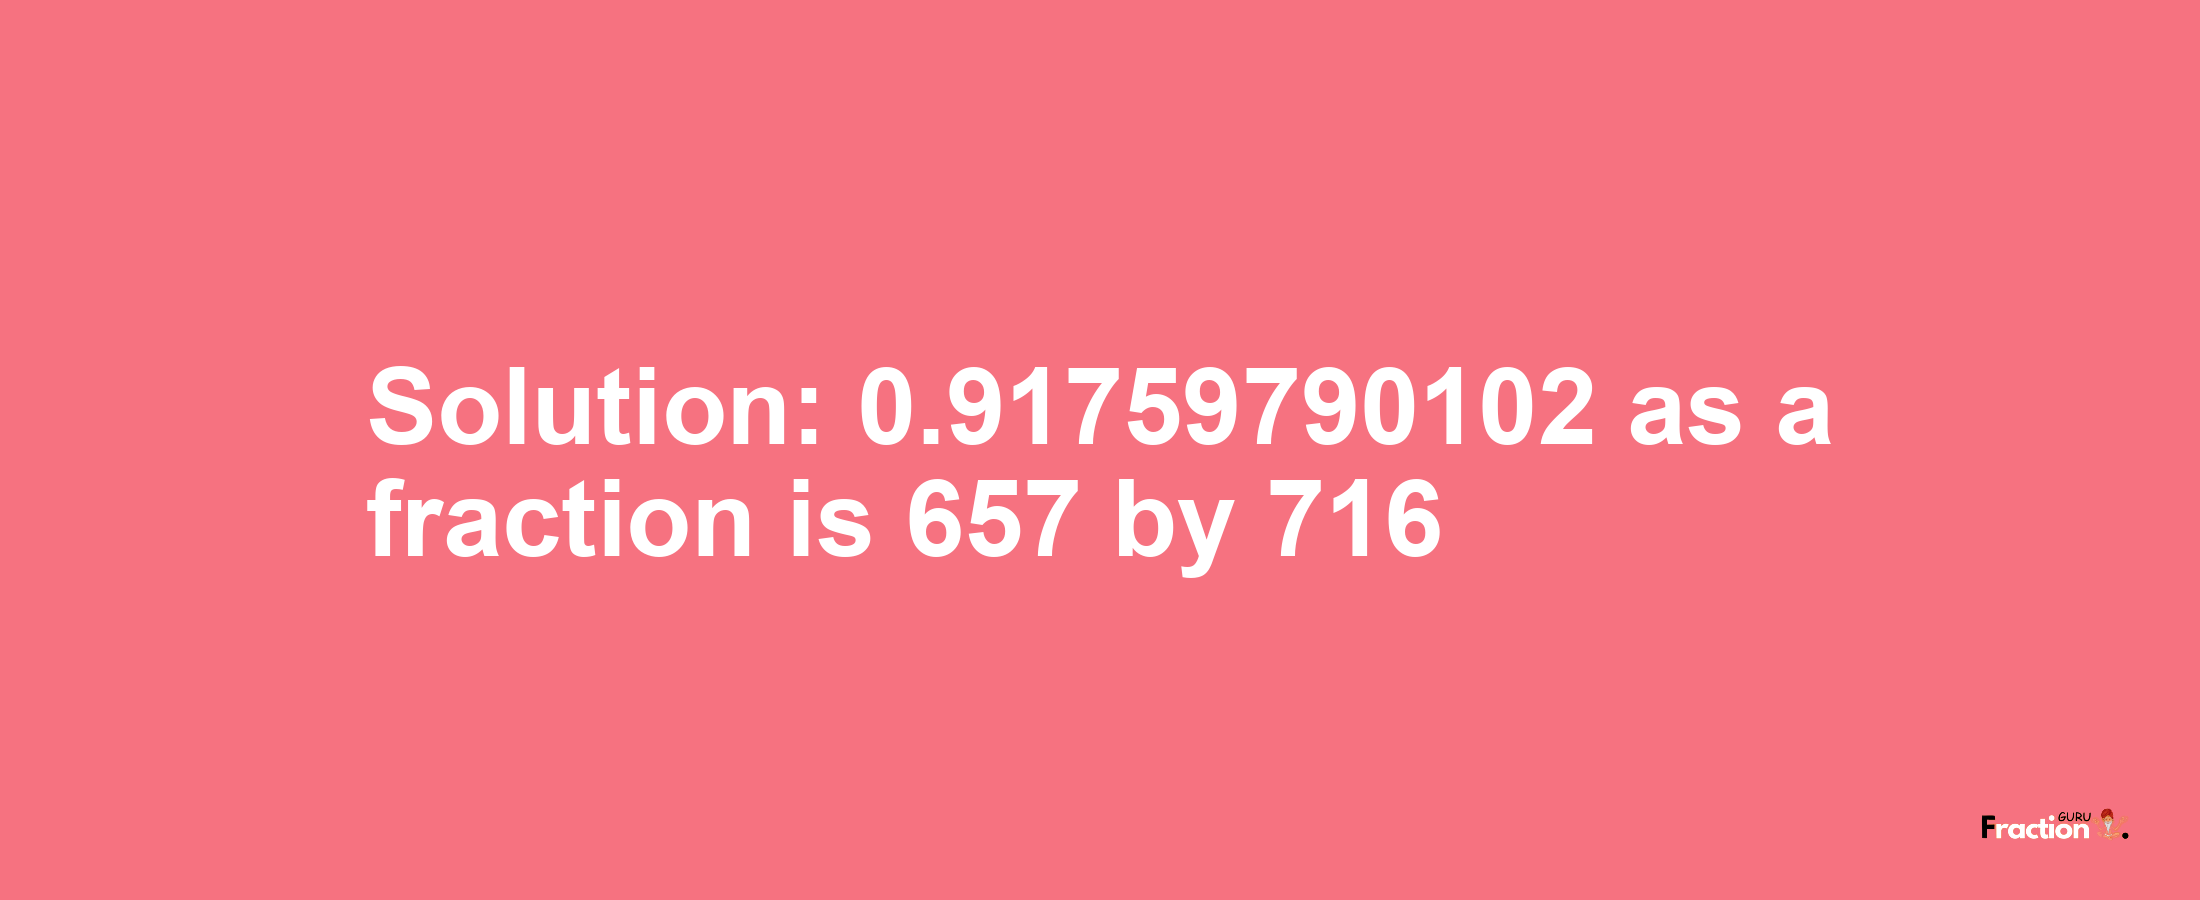 Solution:0.91759790102 as a fraction is 657/716